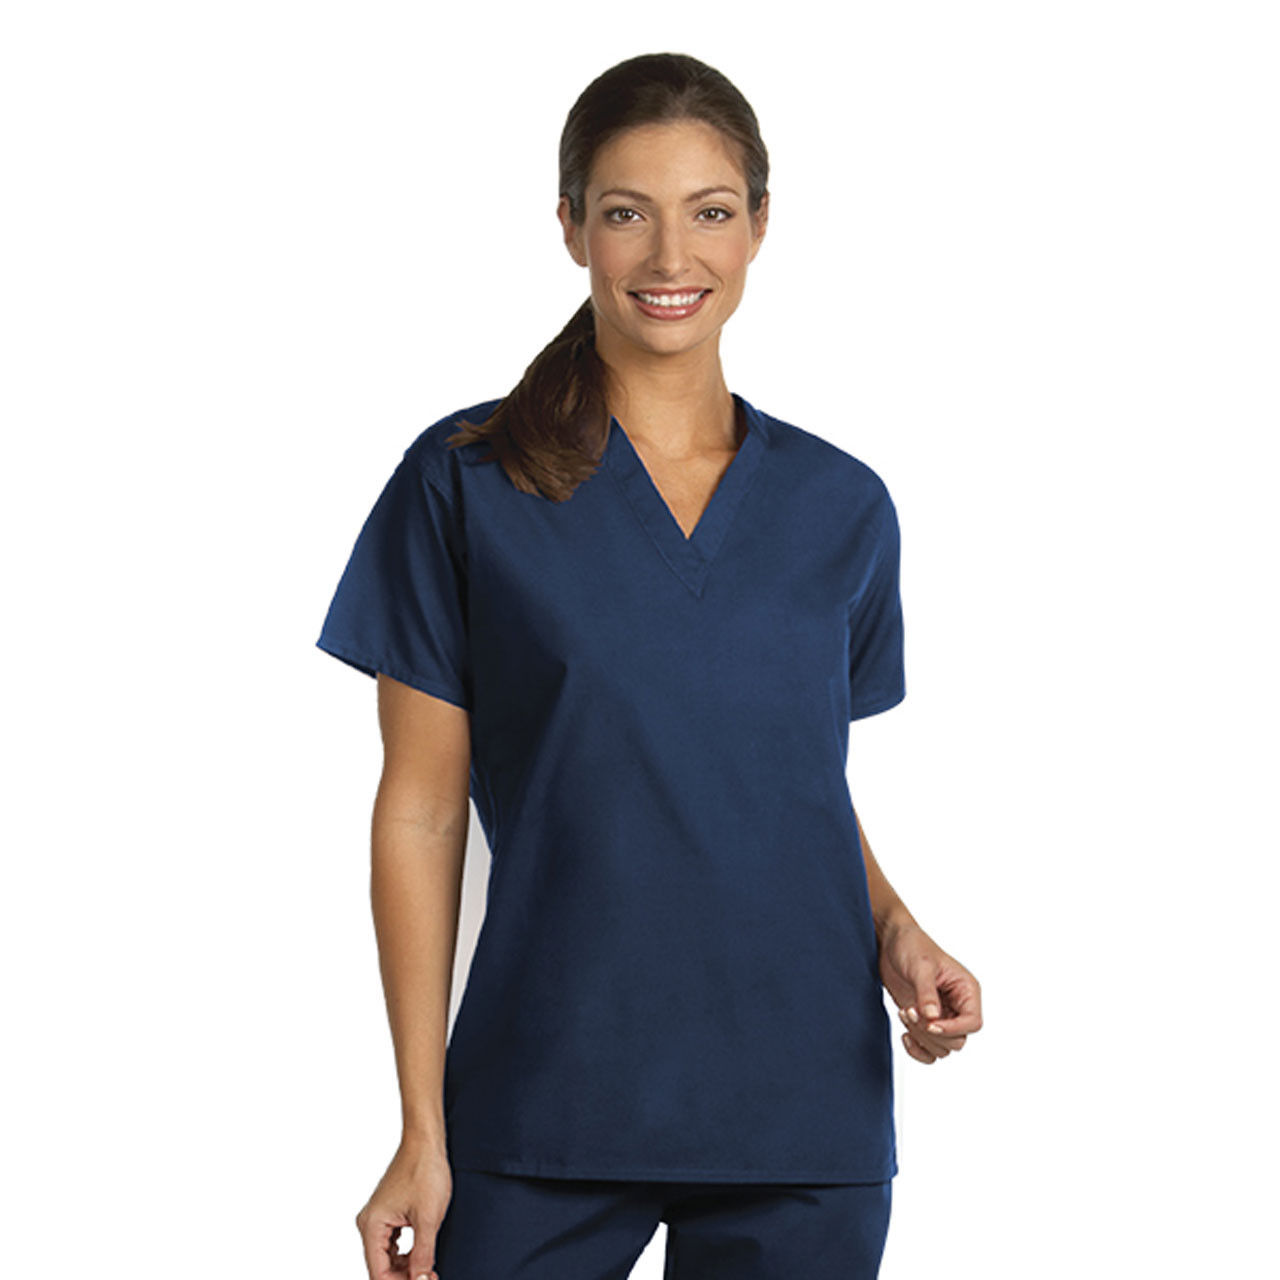 How is the design of these cheap nursing scrubs' bottom?